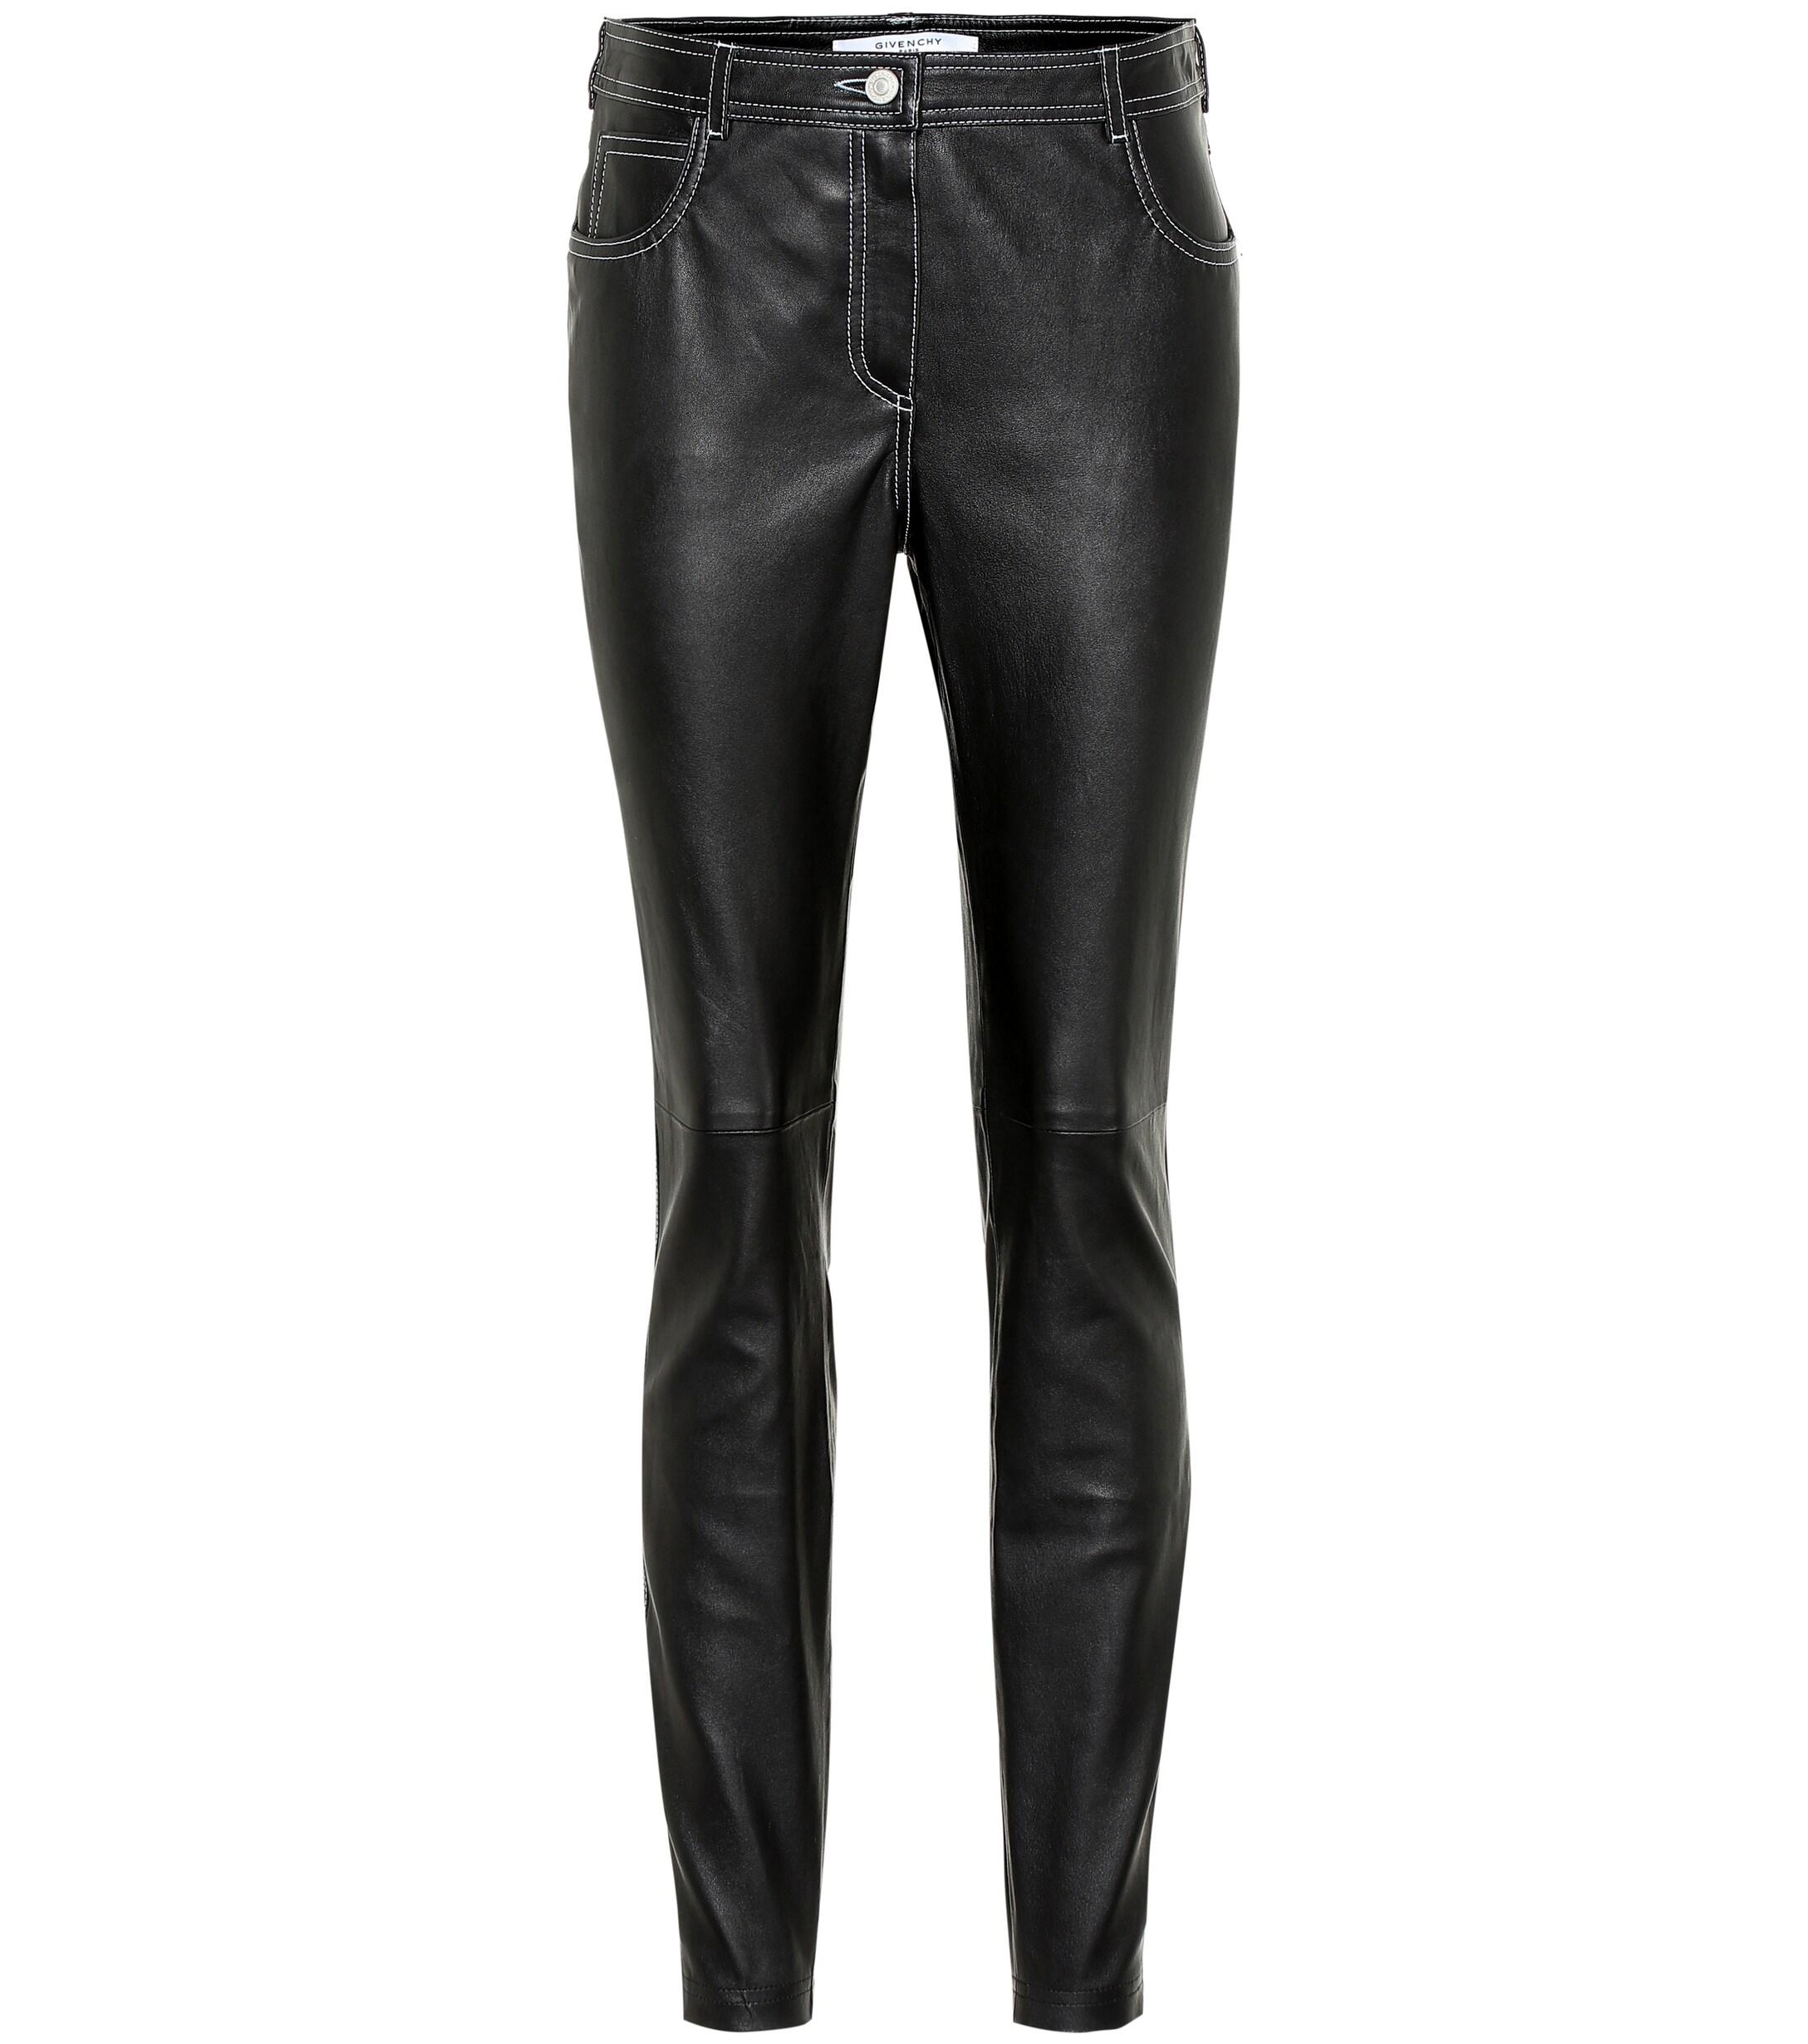 Givenchy Leather Skinny Pants in Black - Lyst